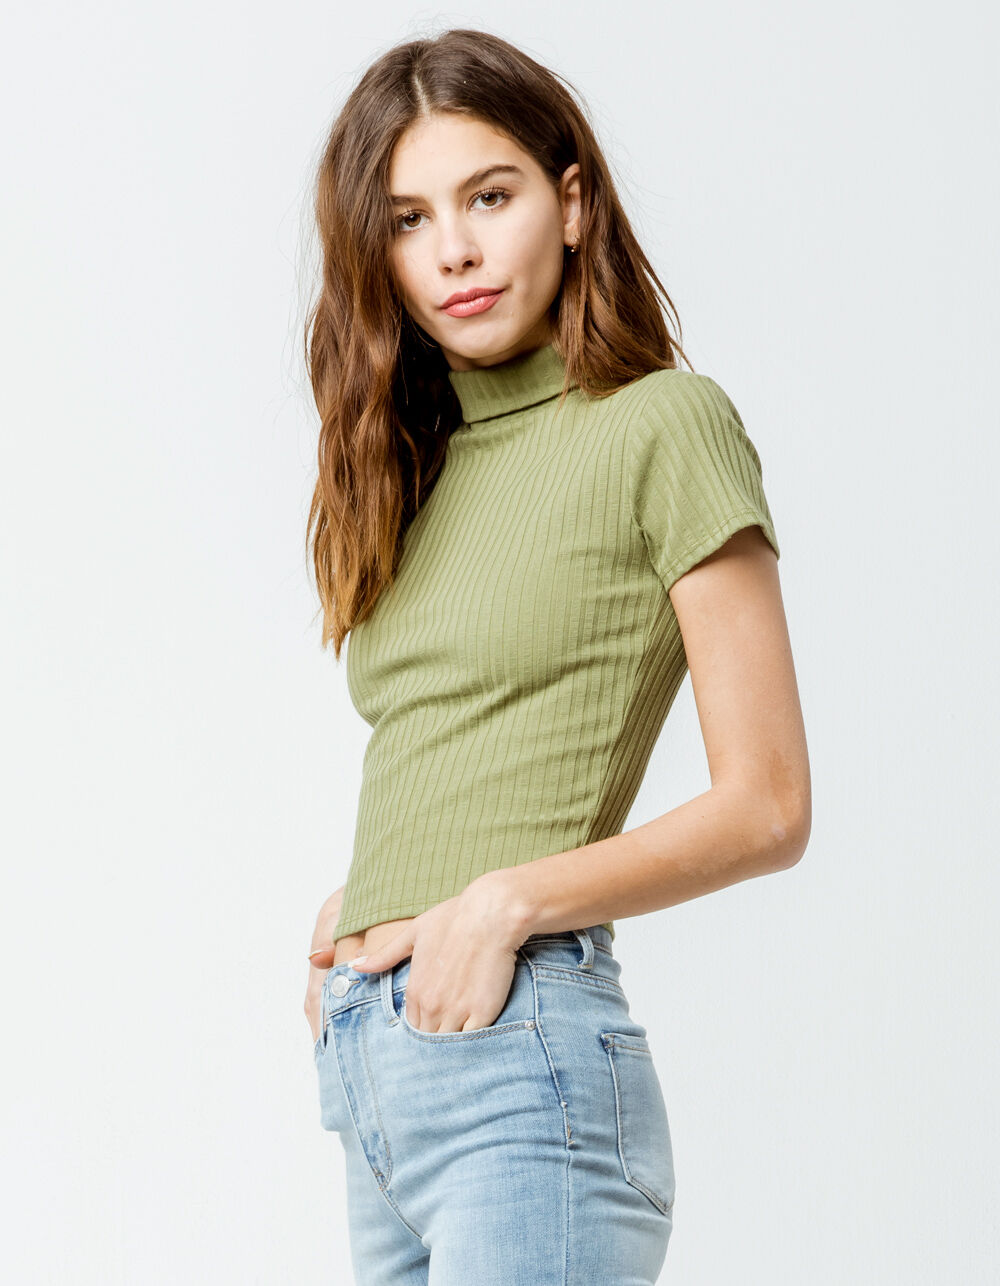 SKY AND SPARROW Solid Turtleneck Olive Womens Tee image number 1